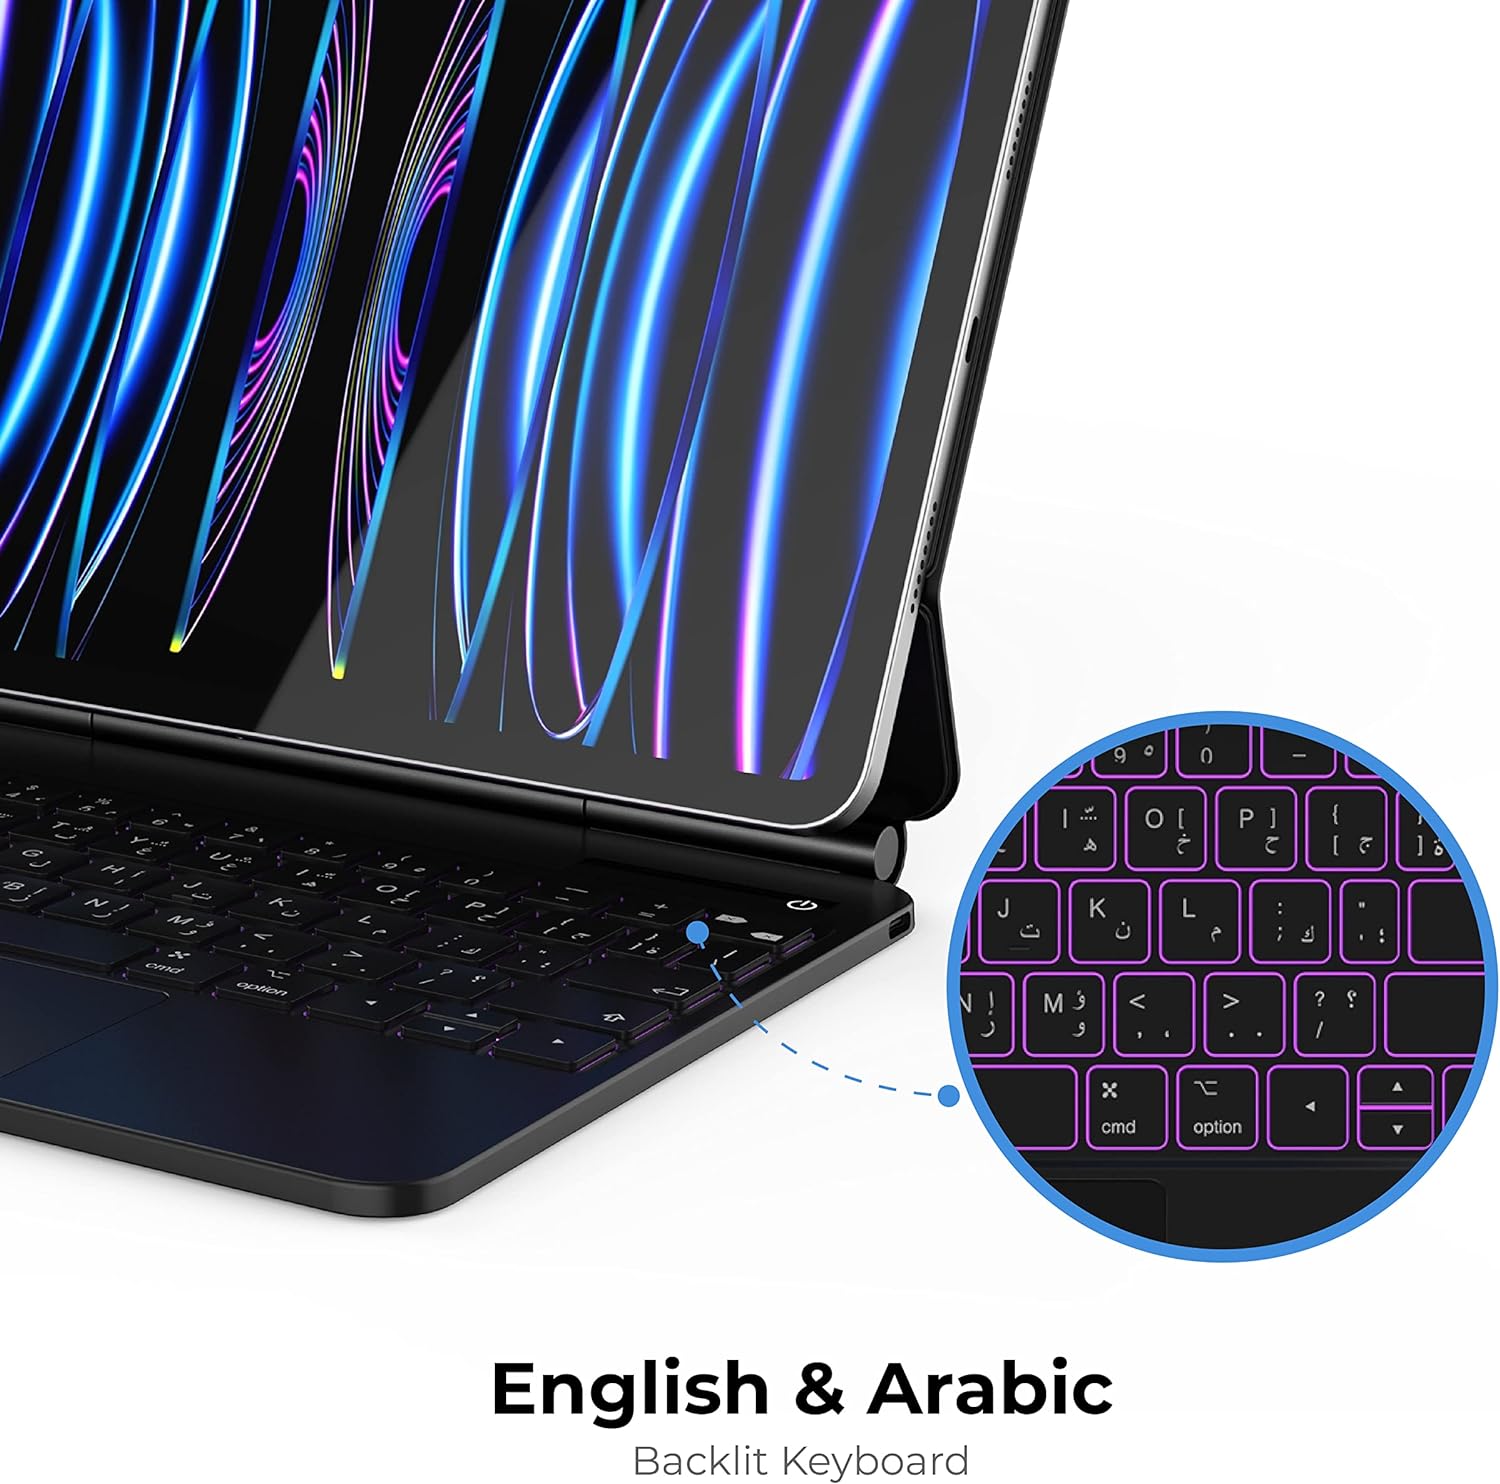 Blupebble Magic Folio Detachable Magnetic Keyboard with Large Precision Trackpad, Full-Size Backlit Keyboard Designed for iPad Pro 4th Gen. (11 inches)/iPad Air 5th Gen (10.9 inches)